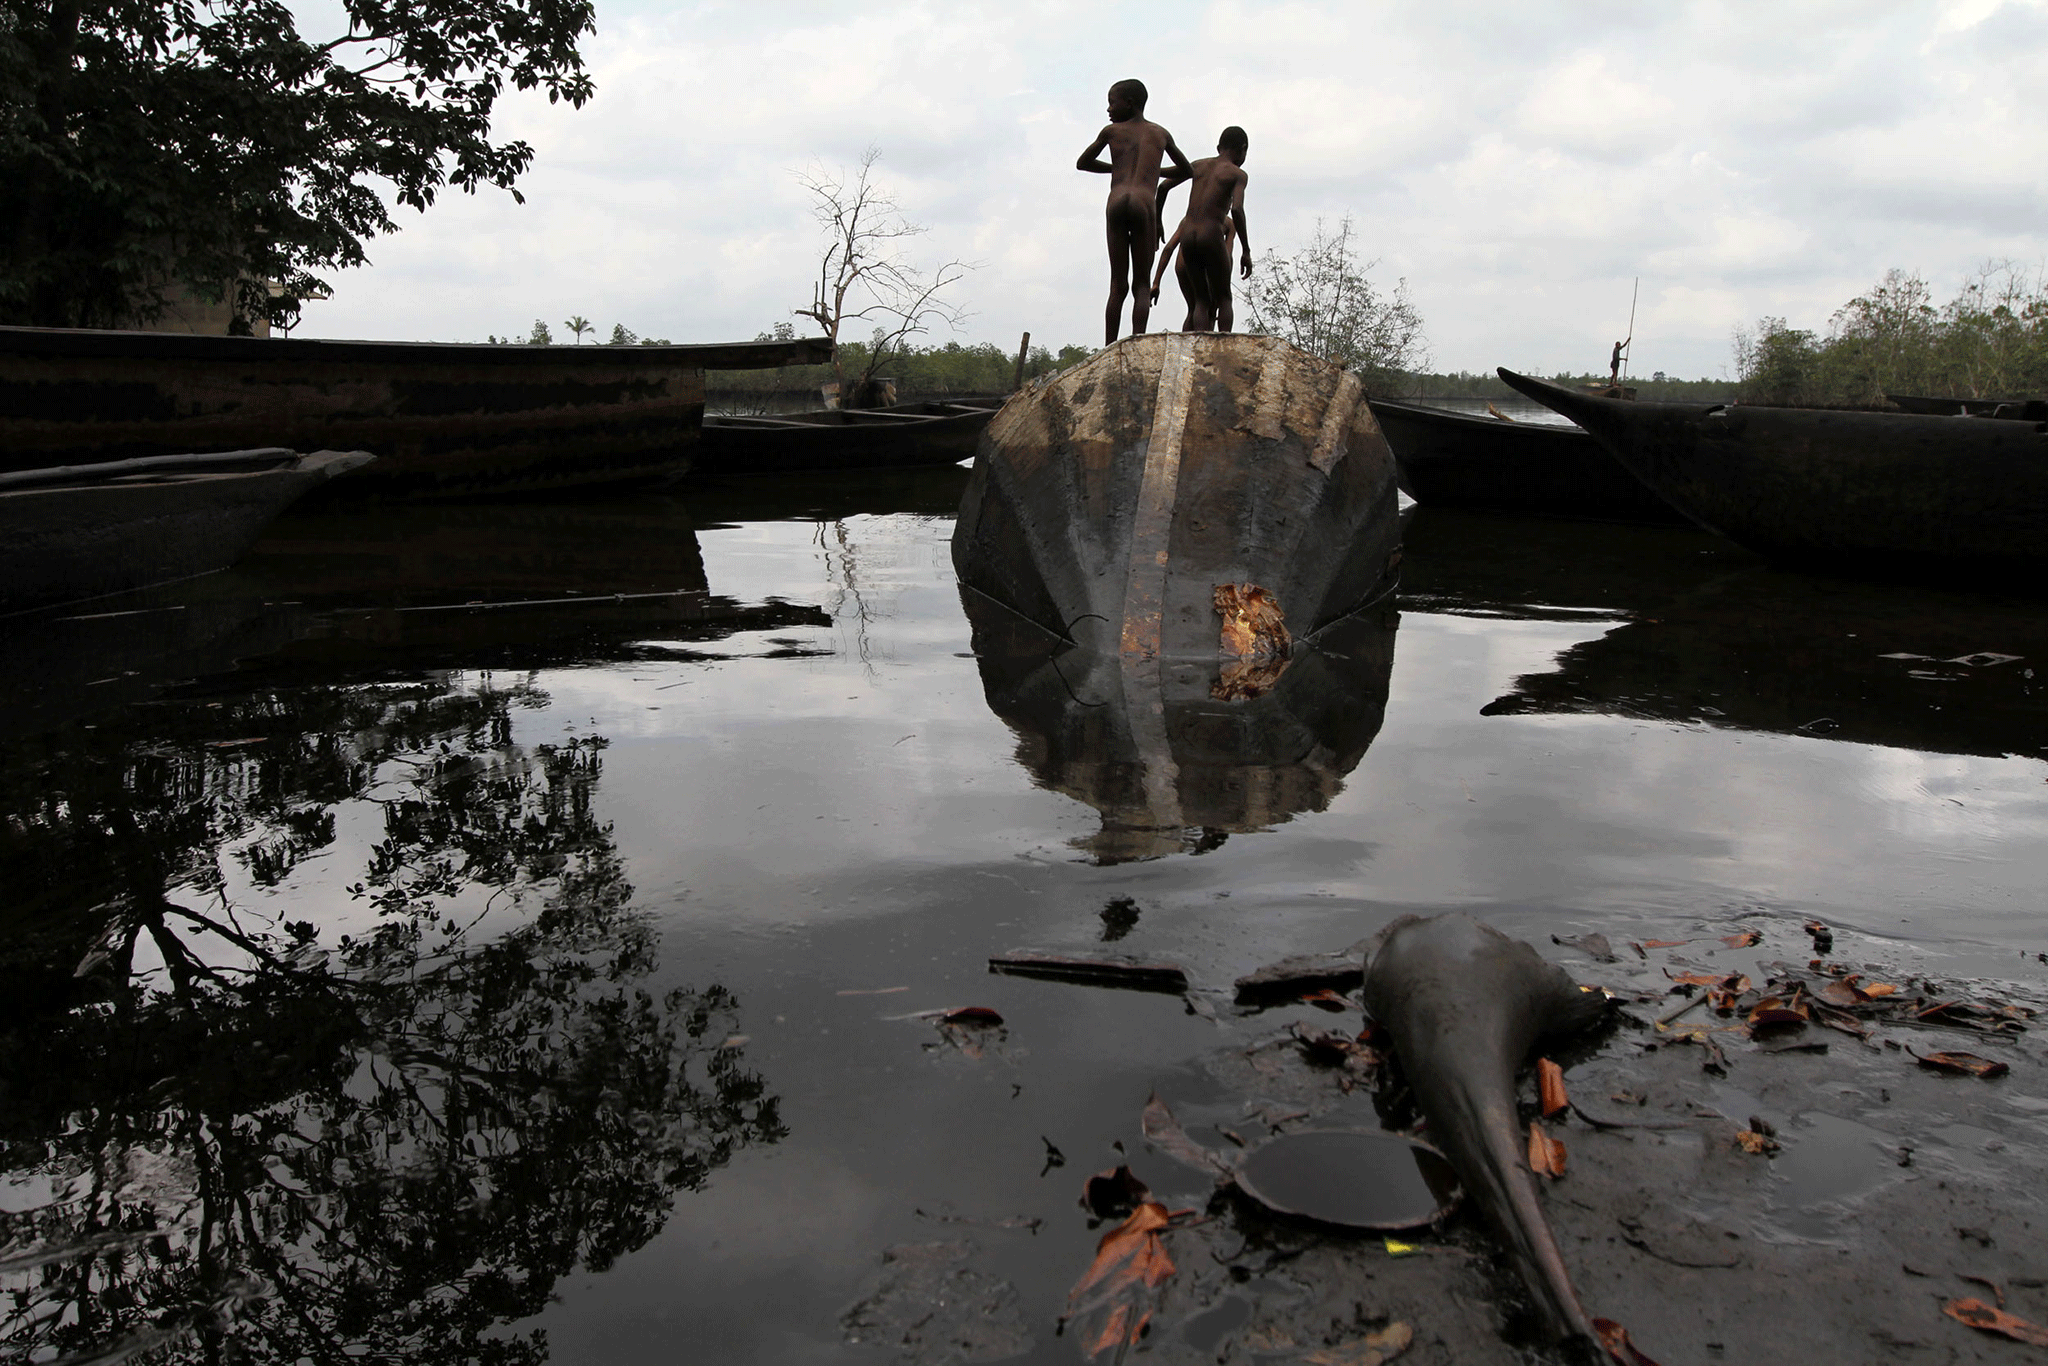 Children play on an abandoned canoe at the bank of a polluted river in Bidere community in Ogoniland